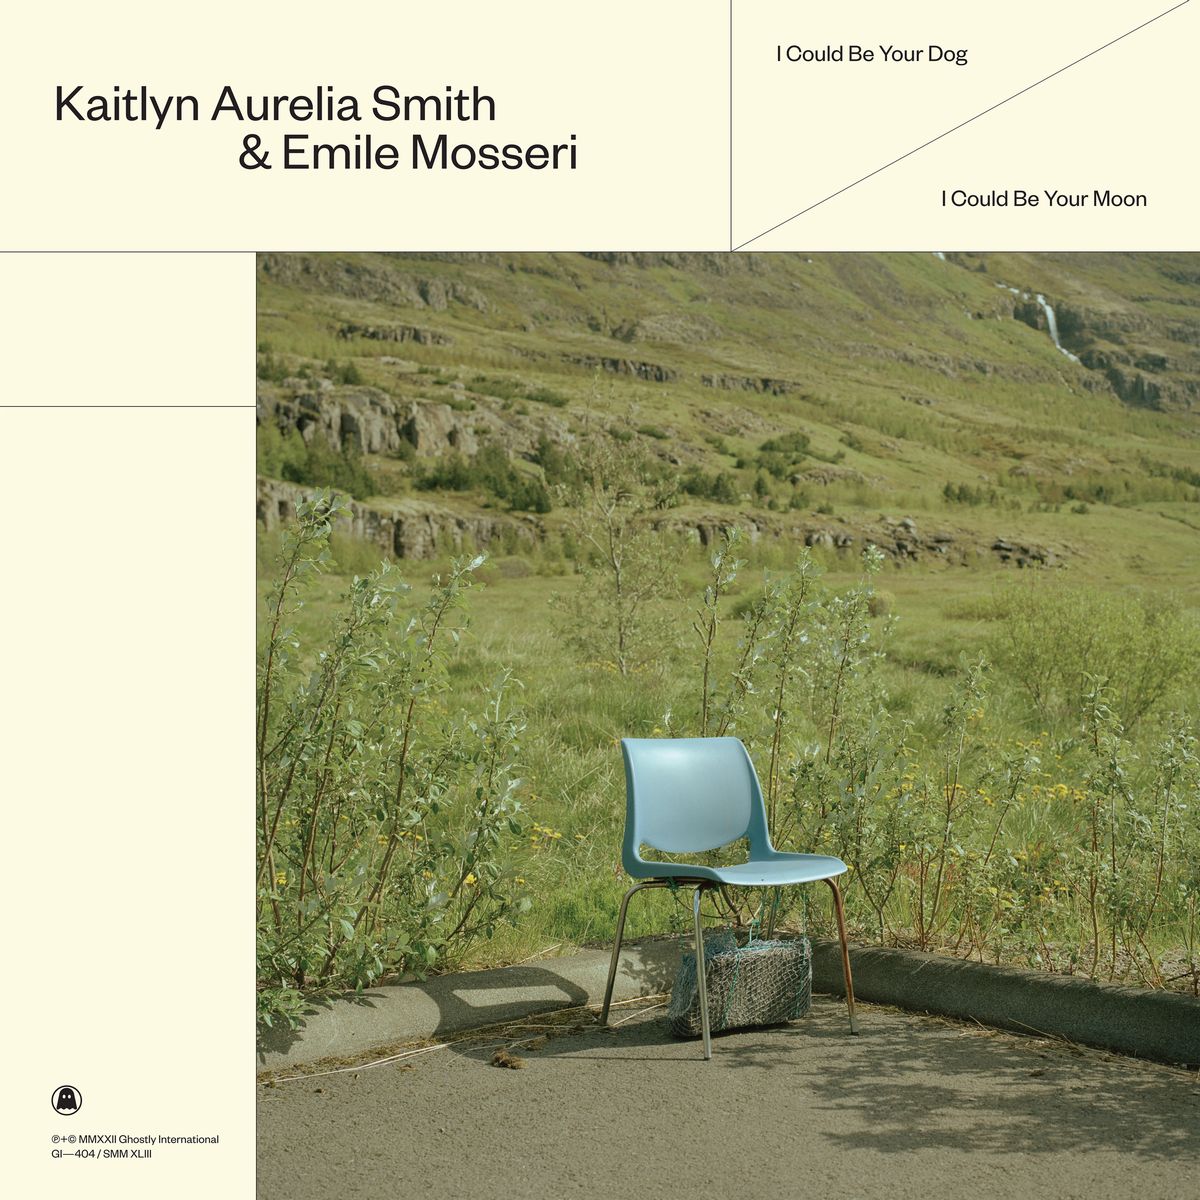 KAITLYN AURELIA SMITH & EMILE MOSSERI / ケイトリン・アウレリア・スミス・アンド・エミール・モセリ / I COULD BE YOUR DOG / I COULD BE YOUR MOON (COLORED VINYL)